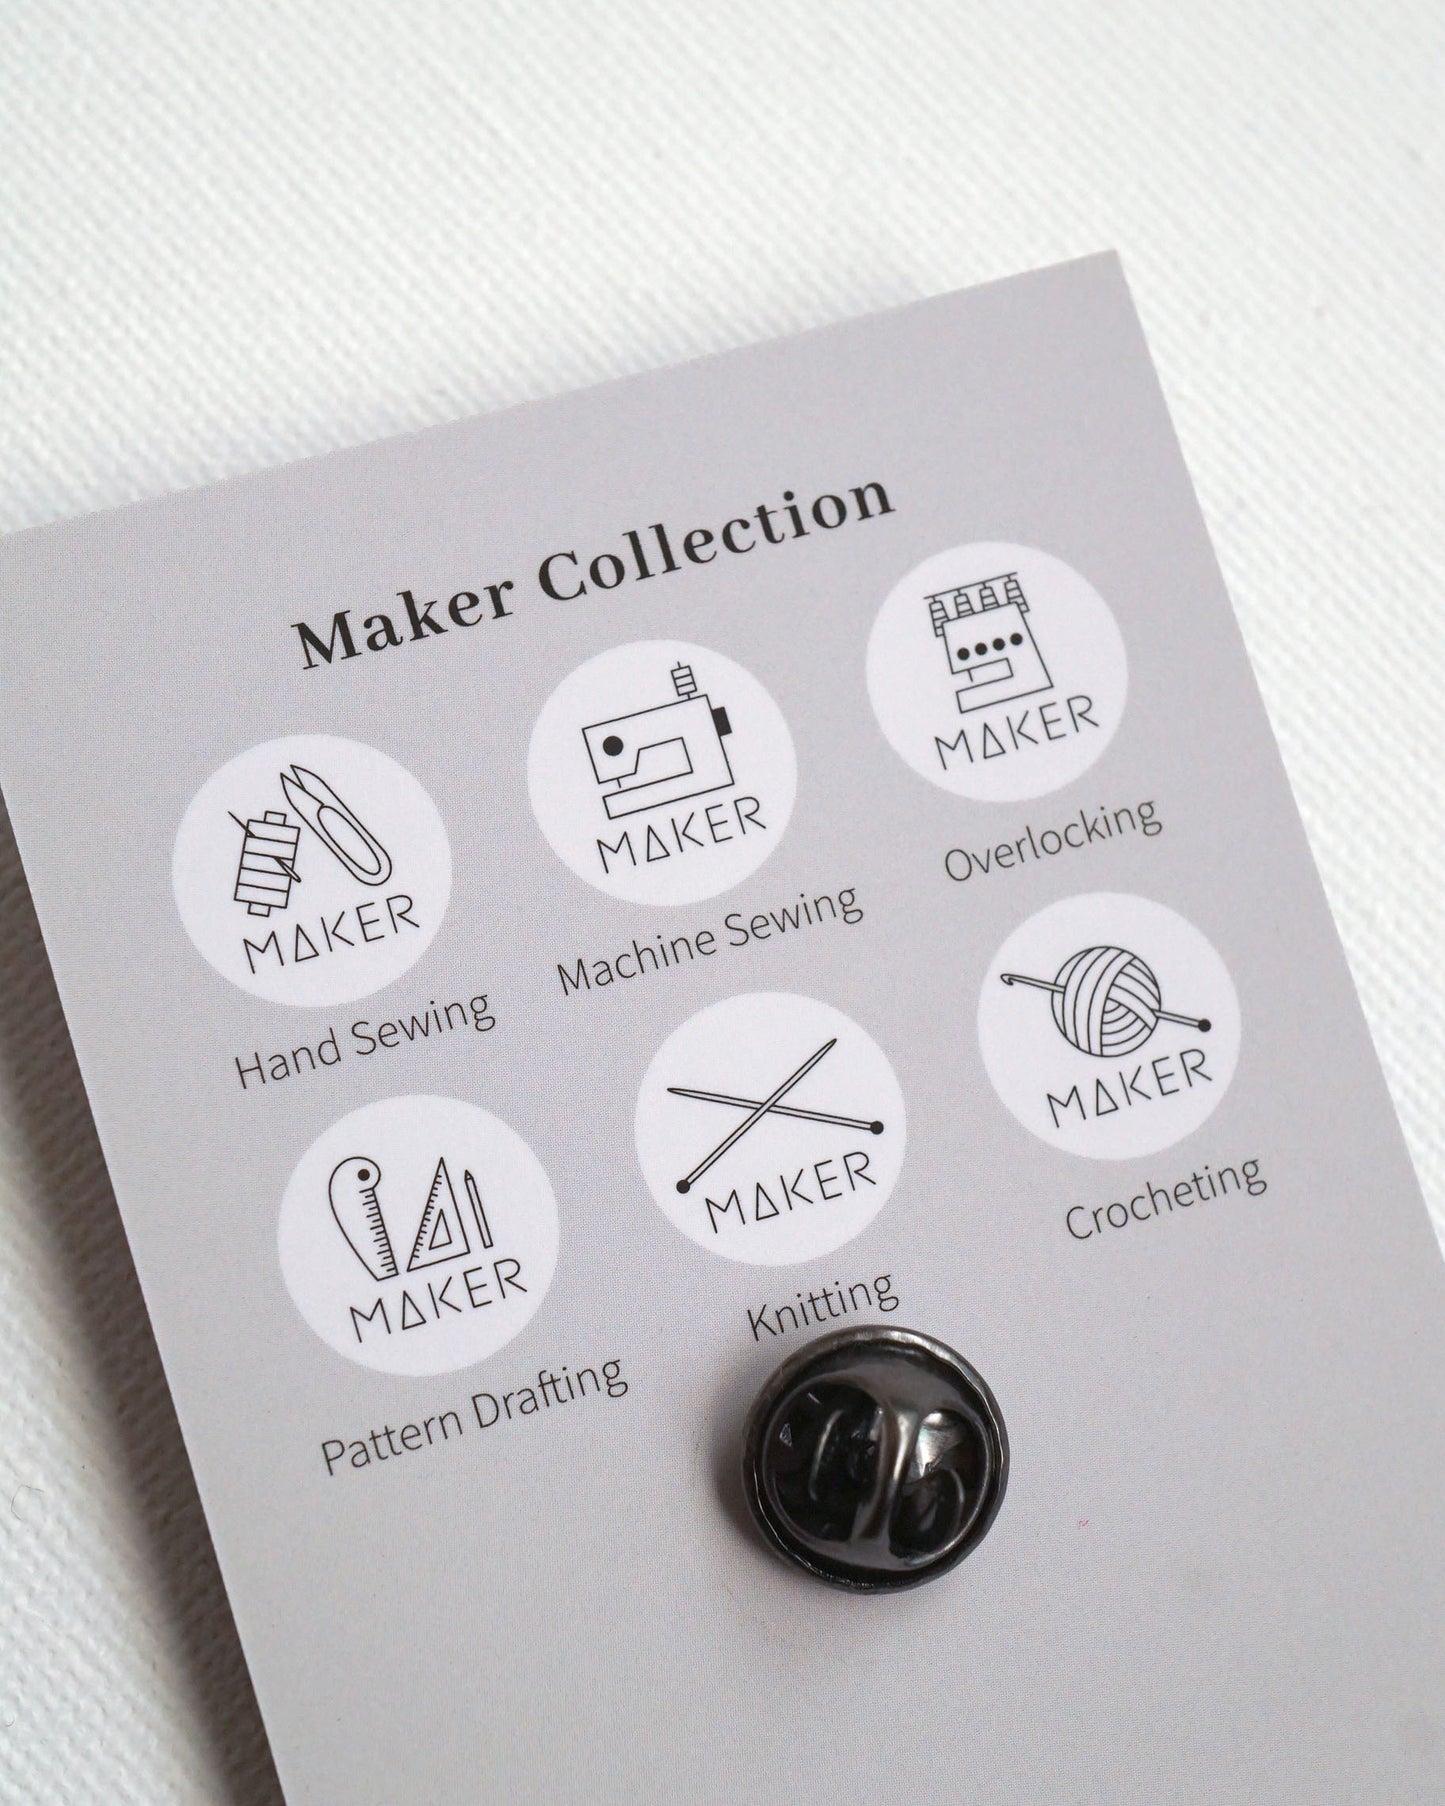 The Maker Badge - Hand Sewing